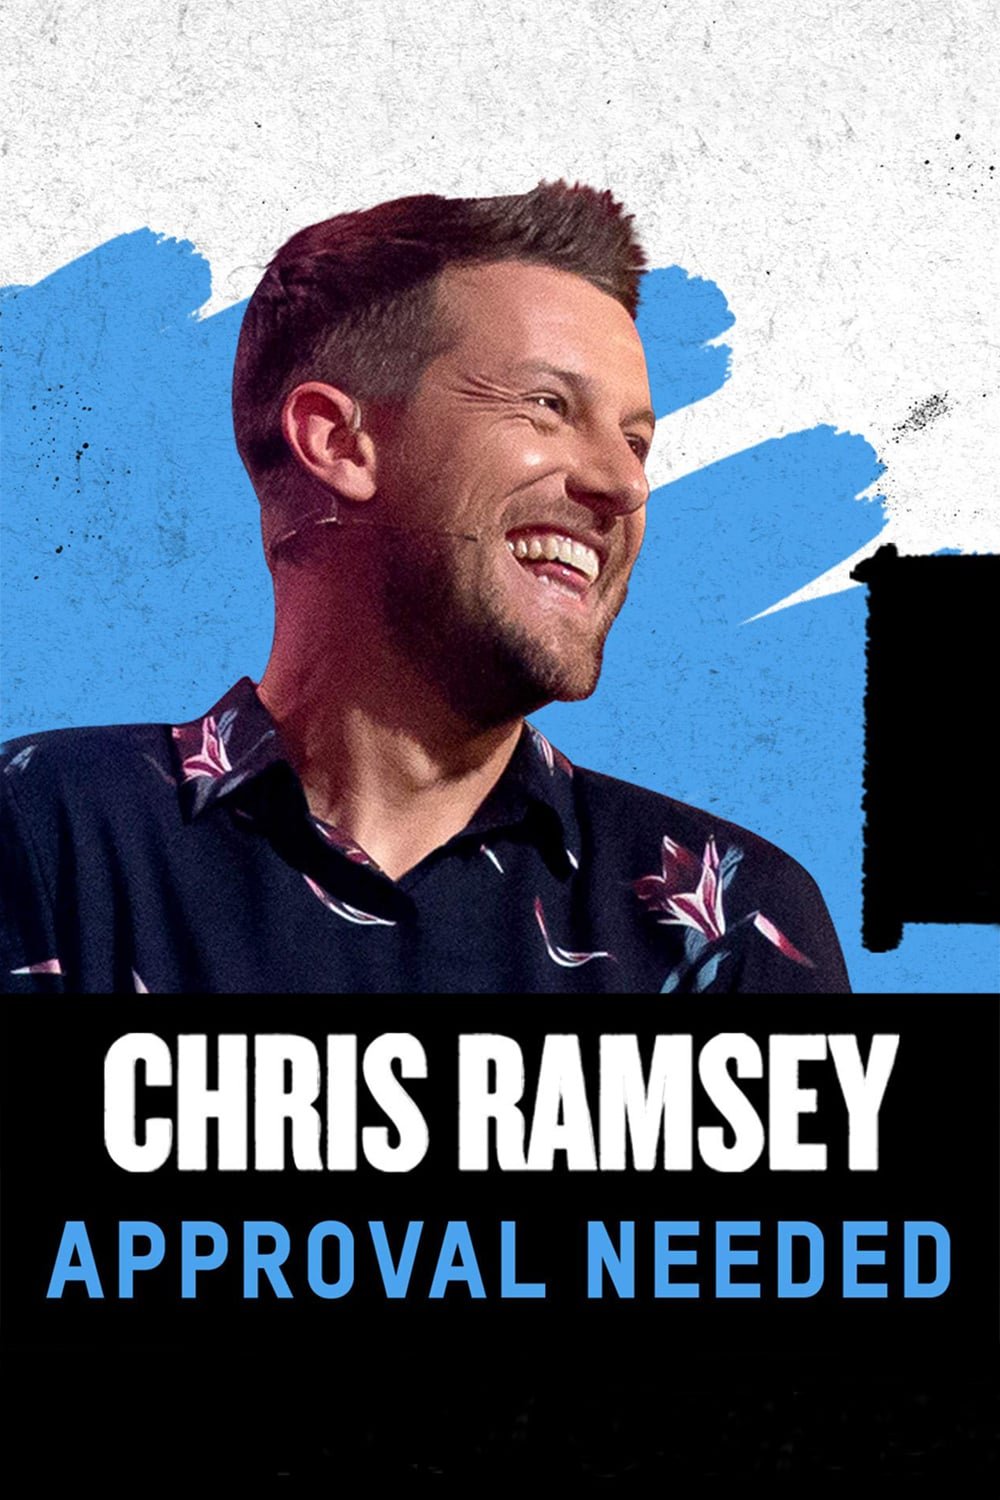 L'affiche du film Chris Ramsey Approval Needed